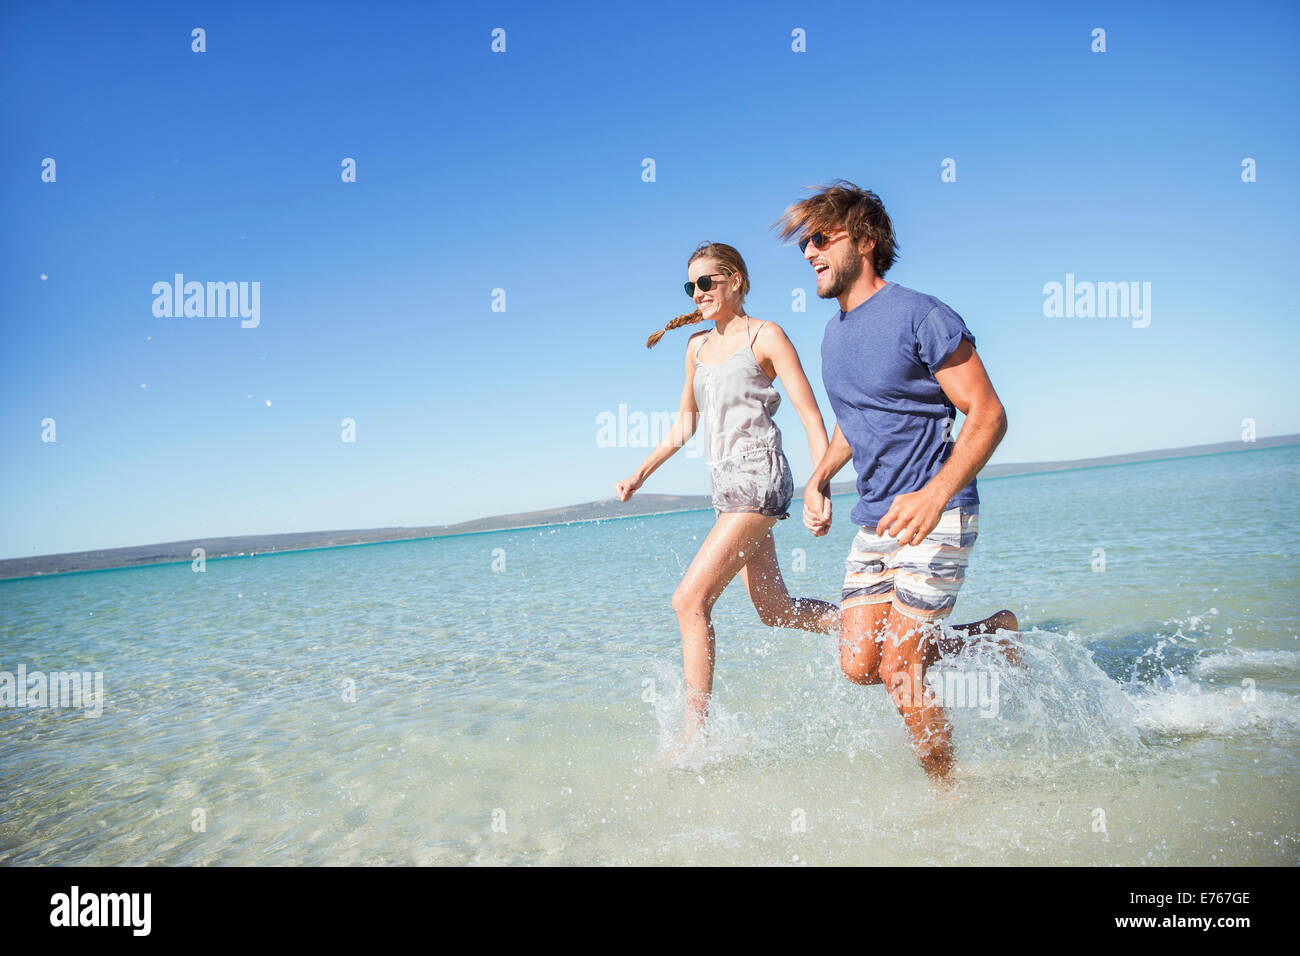 Couple running in water together Stock Photo